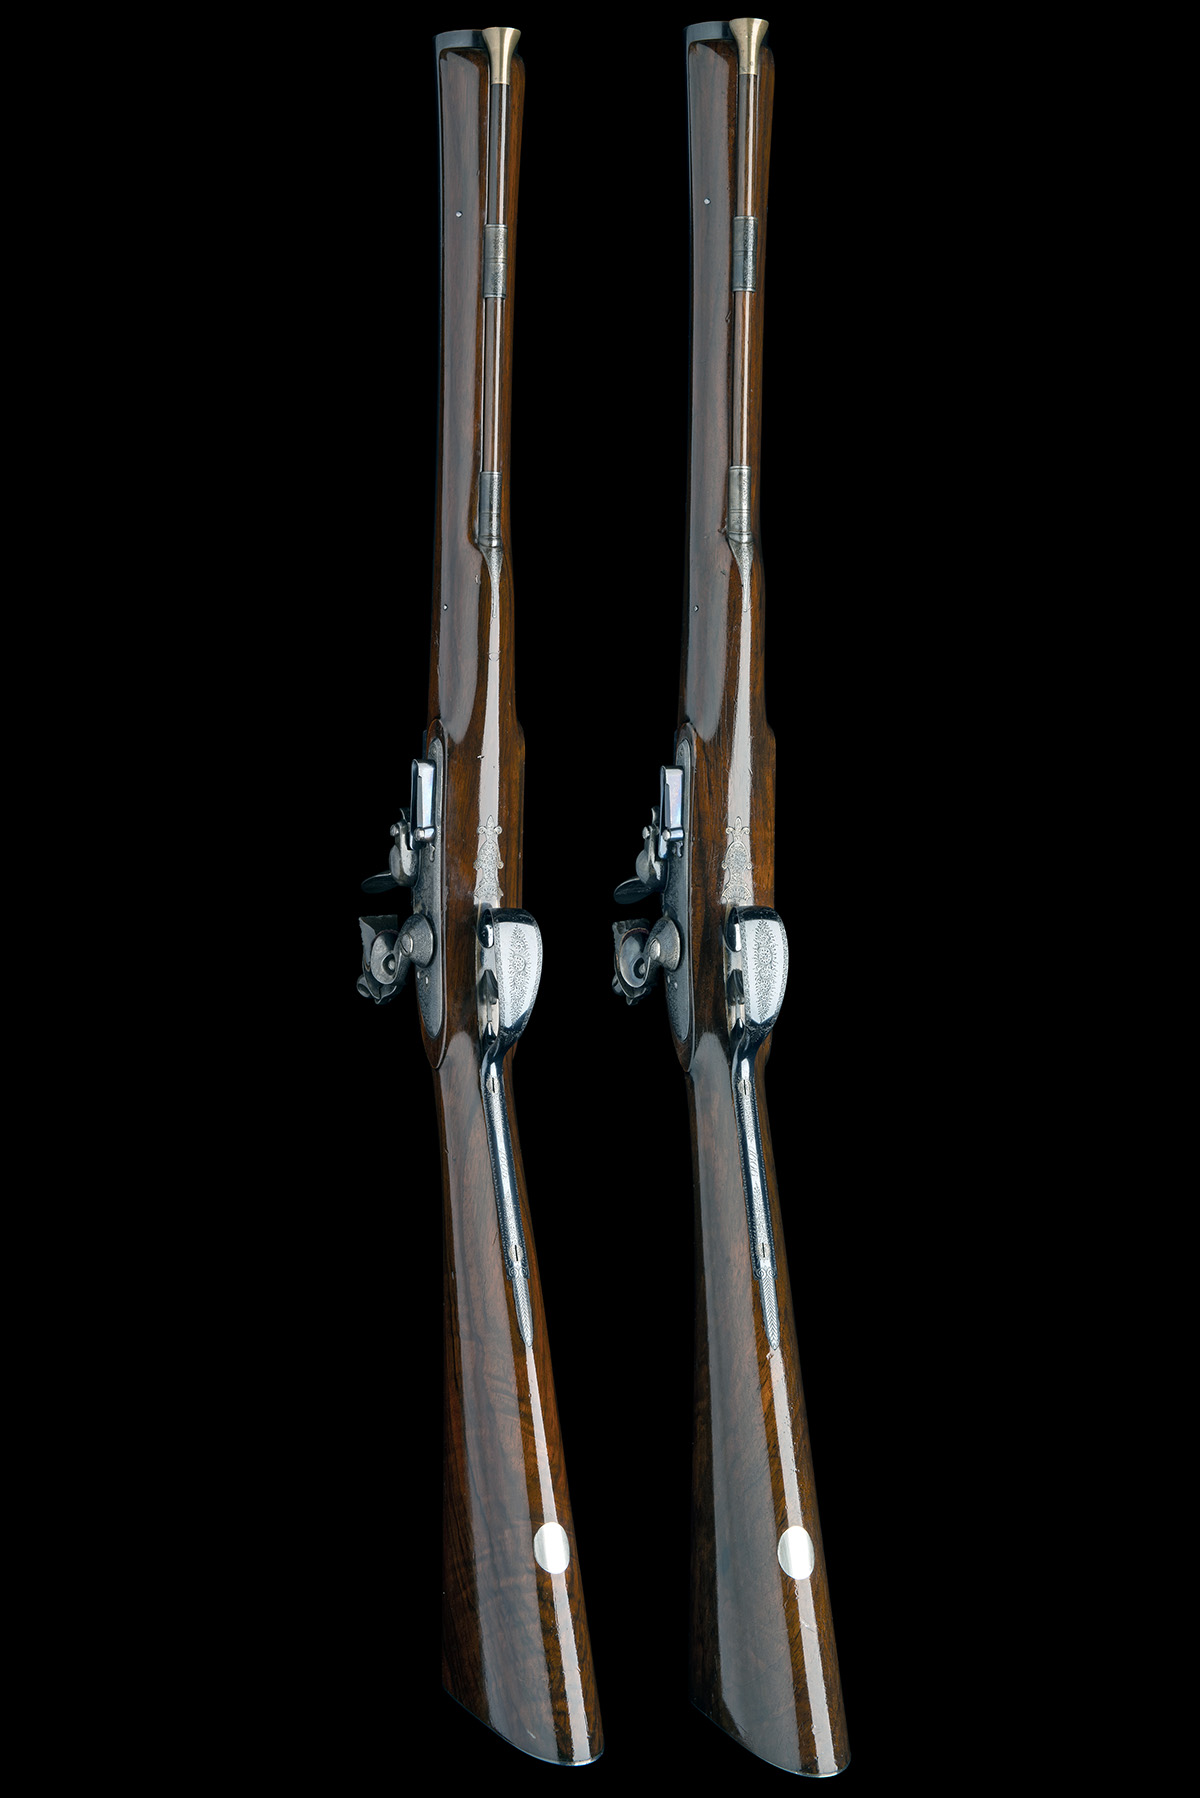 MADE FOR CHARLES GORDON. JOHN DICKSON & SON A UNIQUE PAIR OF 8-BORE FLINTLOCK BLUNDERBUSSES, - Image 3 of 12